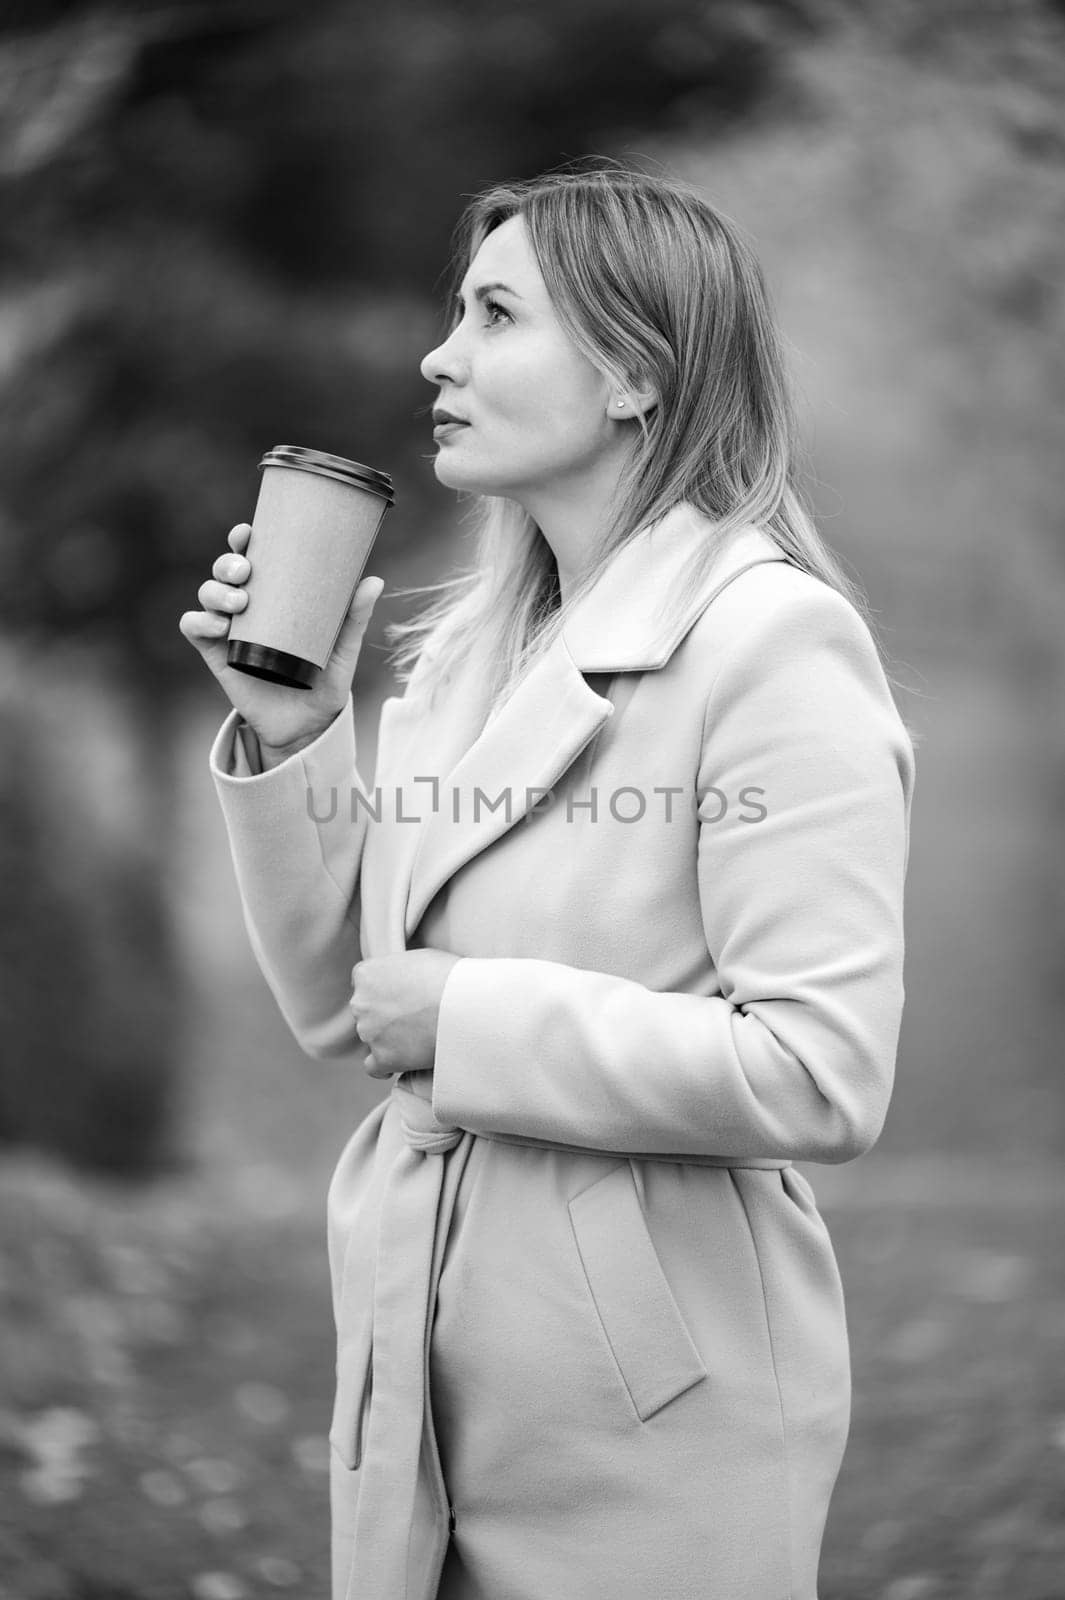 A young girl in the autumn park drinks coffee, rest in the black and white park.